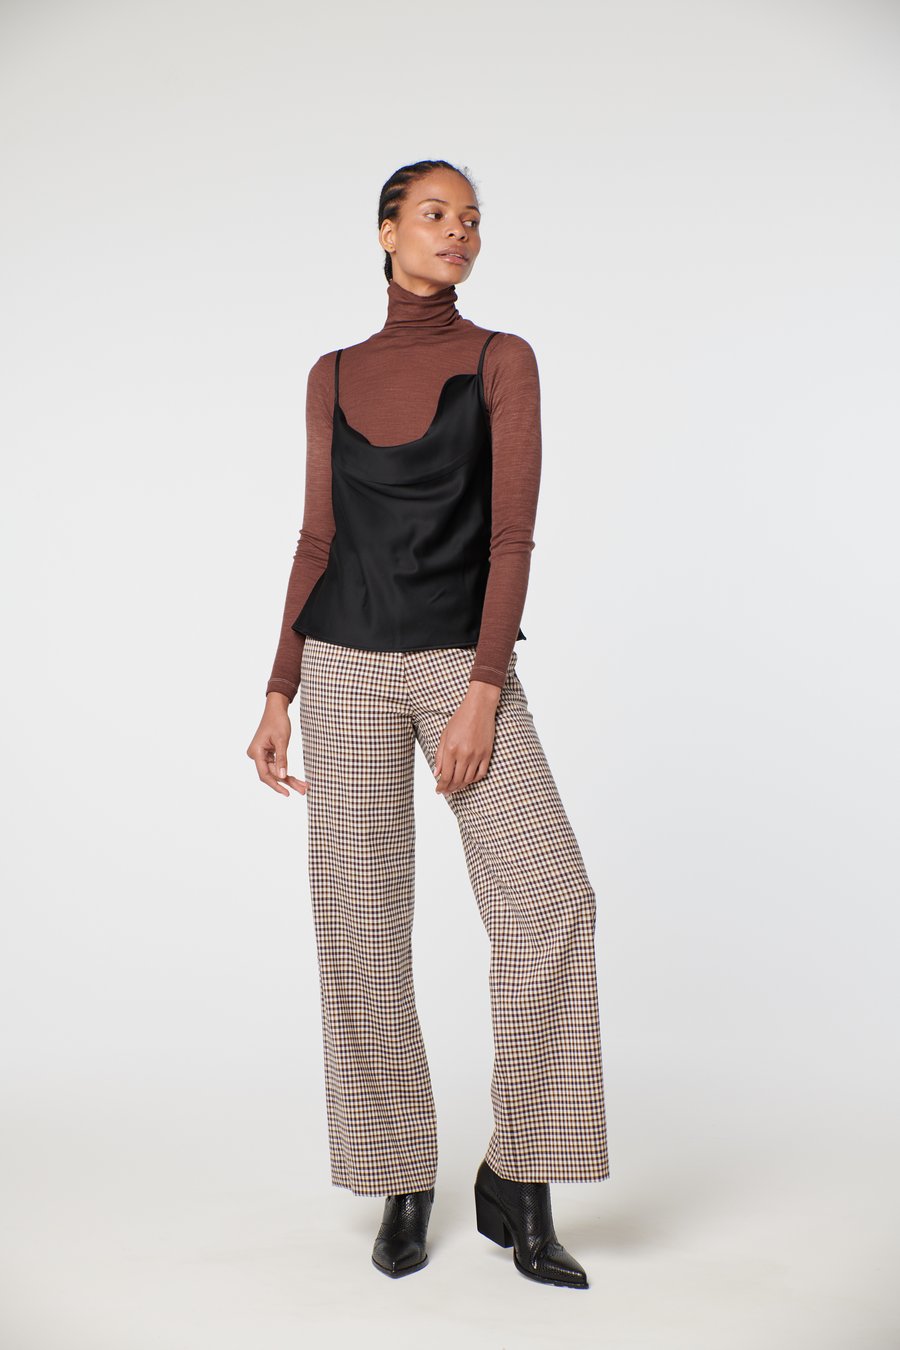 ARNSDORF - SIENA TOP - BLACK Styled with checked pants and brown turtleneck